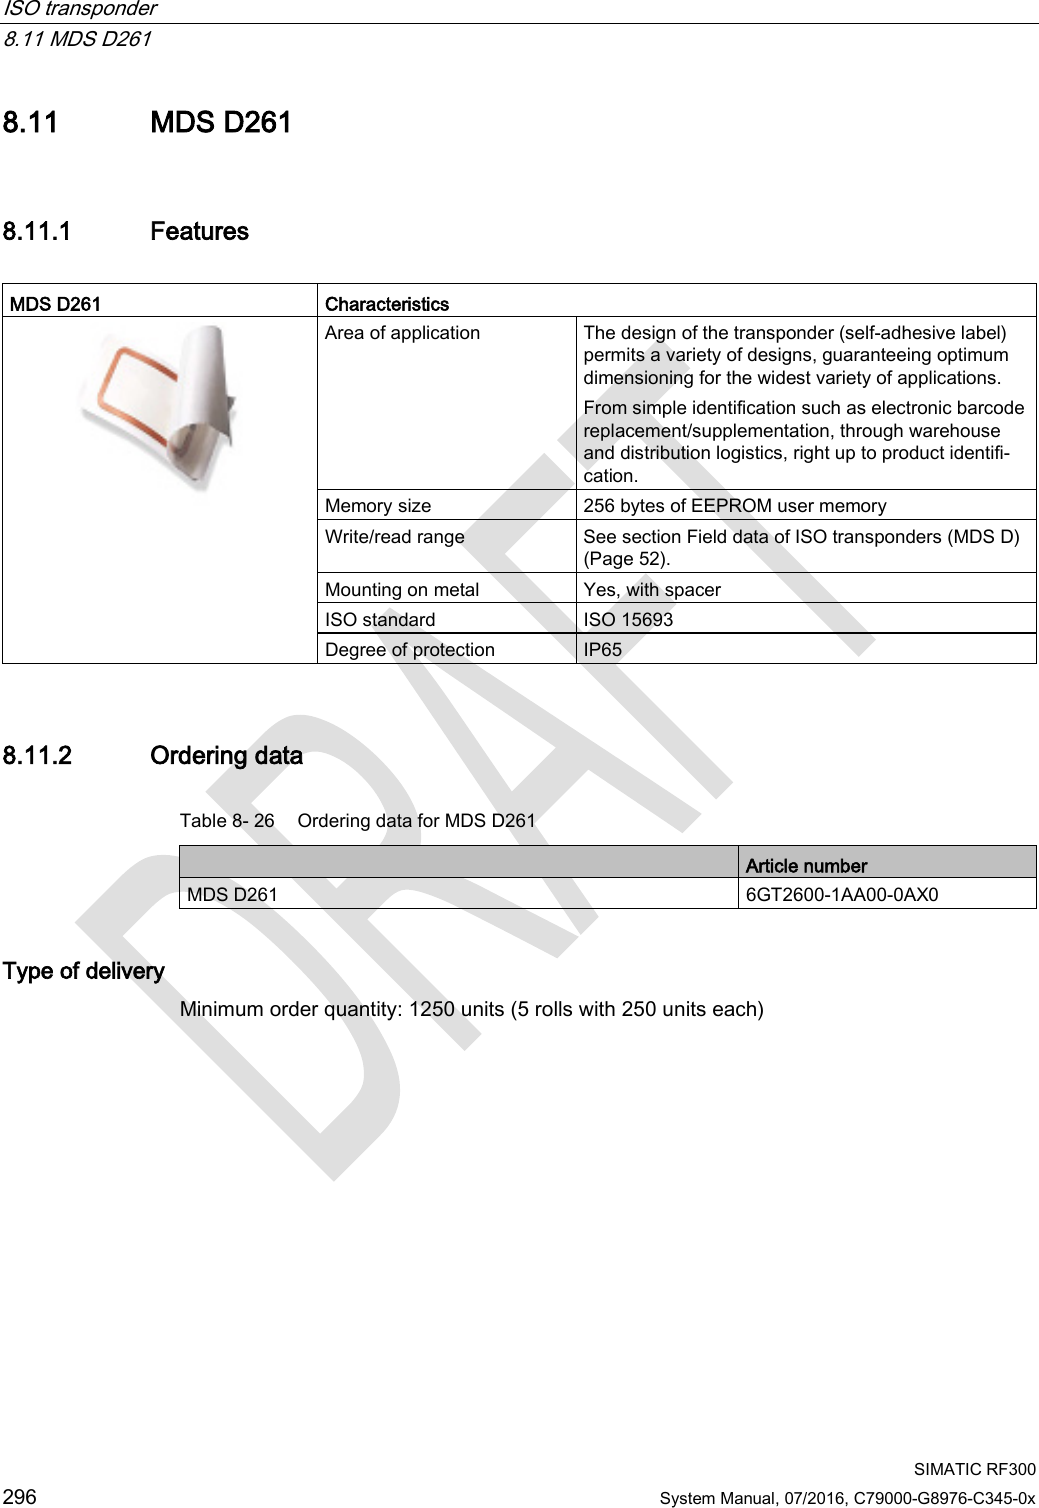 ISO transponder   8.11 MDS D261  SIMATIC RF300 296 System Manual, 07/2016, C79000-G8976-C345-0x 8.11 MDS D261 8.11.1 Features  MDS D261 Characteristics  Area of application The design of the transponder (self-adhesive label) permits a variety of designs, guaranteeing optimum dimensioning for the widest variety of applications. From simple identification such as electronic barcode replacement/supplementation, through warehouse and distribution logistics, right up to product identifi-cation. Memory size 256 bytes of EEPROM user memory Write/read range See section Field data of ISO transponders (MDS D) (Page 52). Mounting on metal Yes, with spacer ISO standard ISO 15693 Degree of protection IP65 8.11.2 Ordering data Table 8- 26 Ordering data for MDS D261  Article number MDS D261 6GT2600-1AA00-0AX0 Type of delivery Minimum order quantity: 1250 units (5 rolls with 250 units each) 